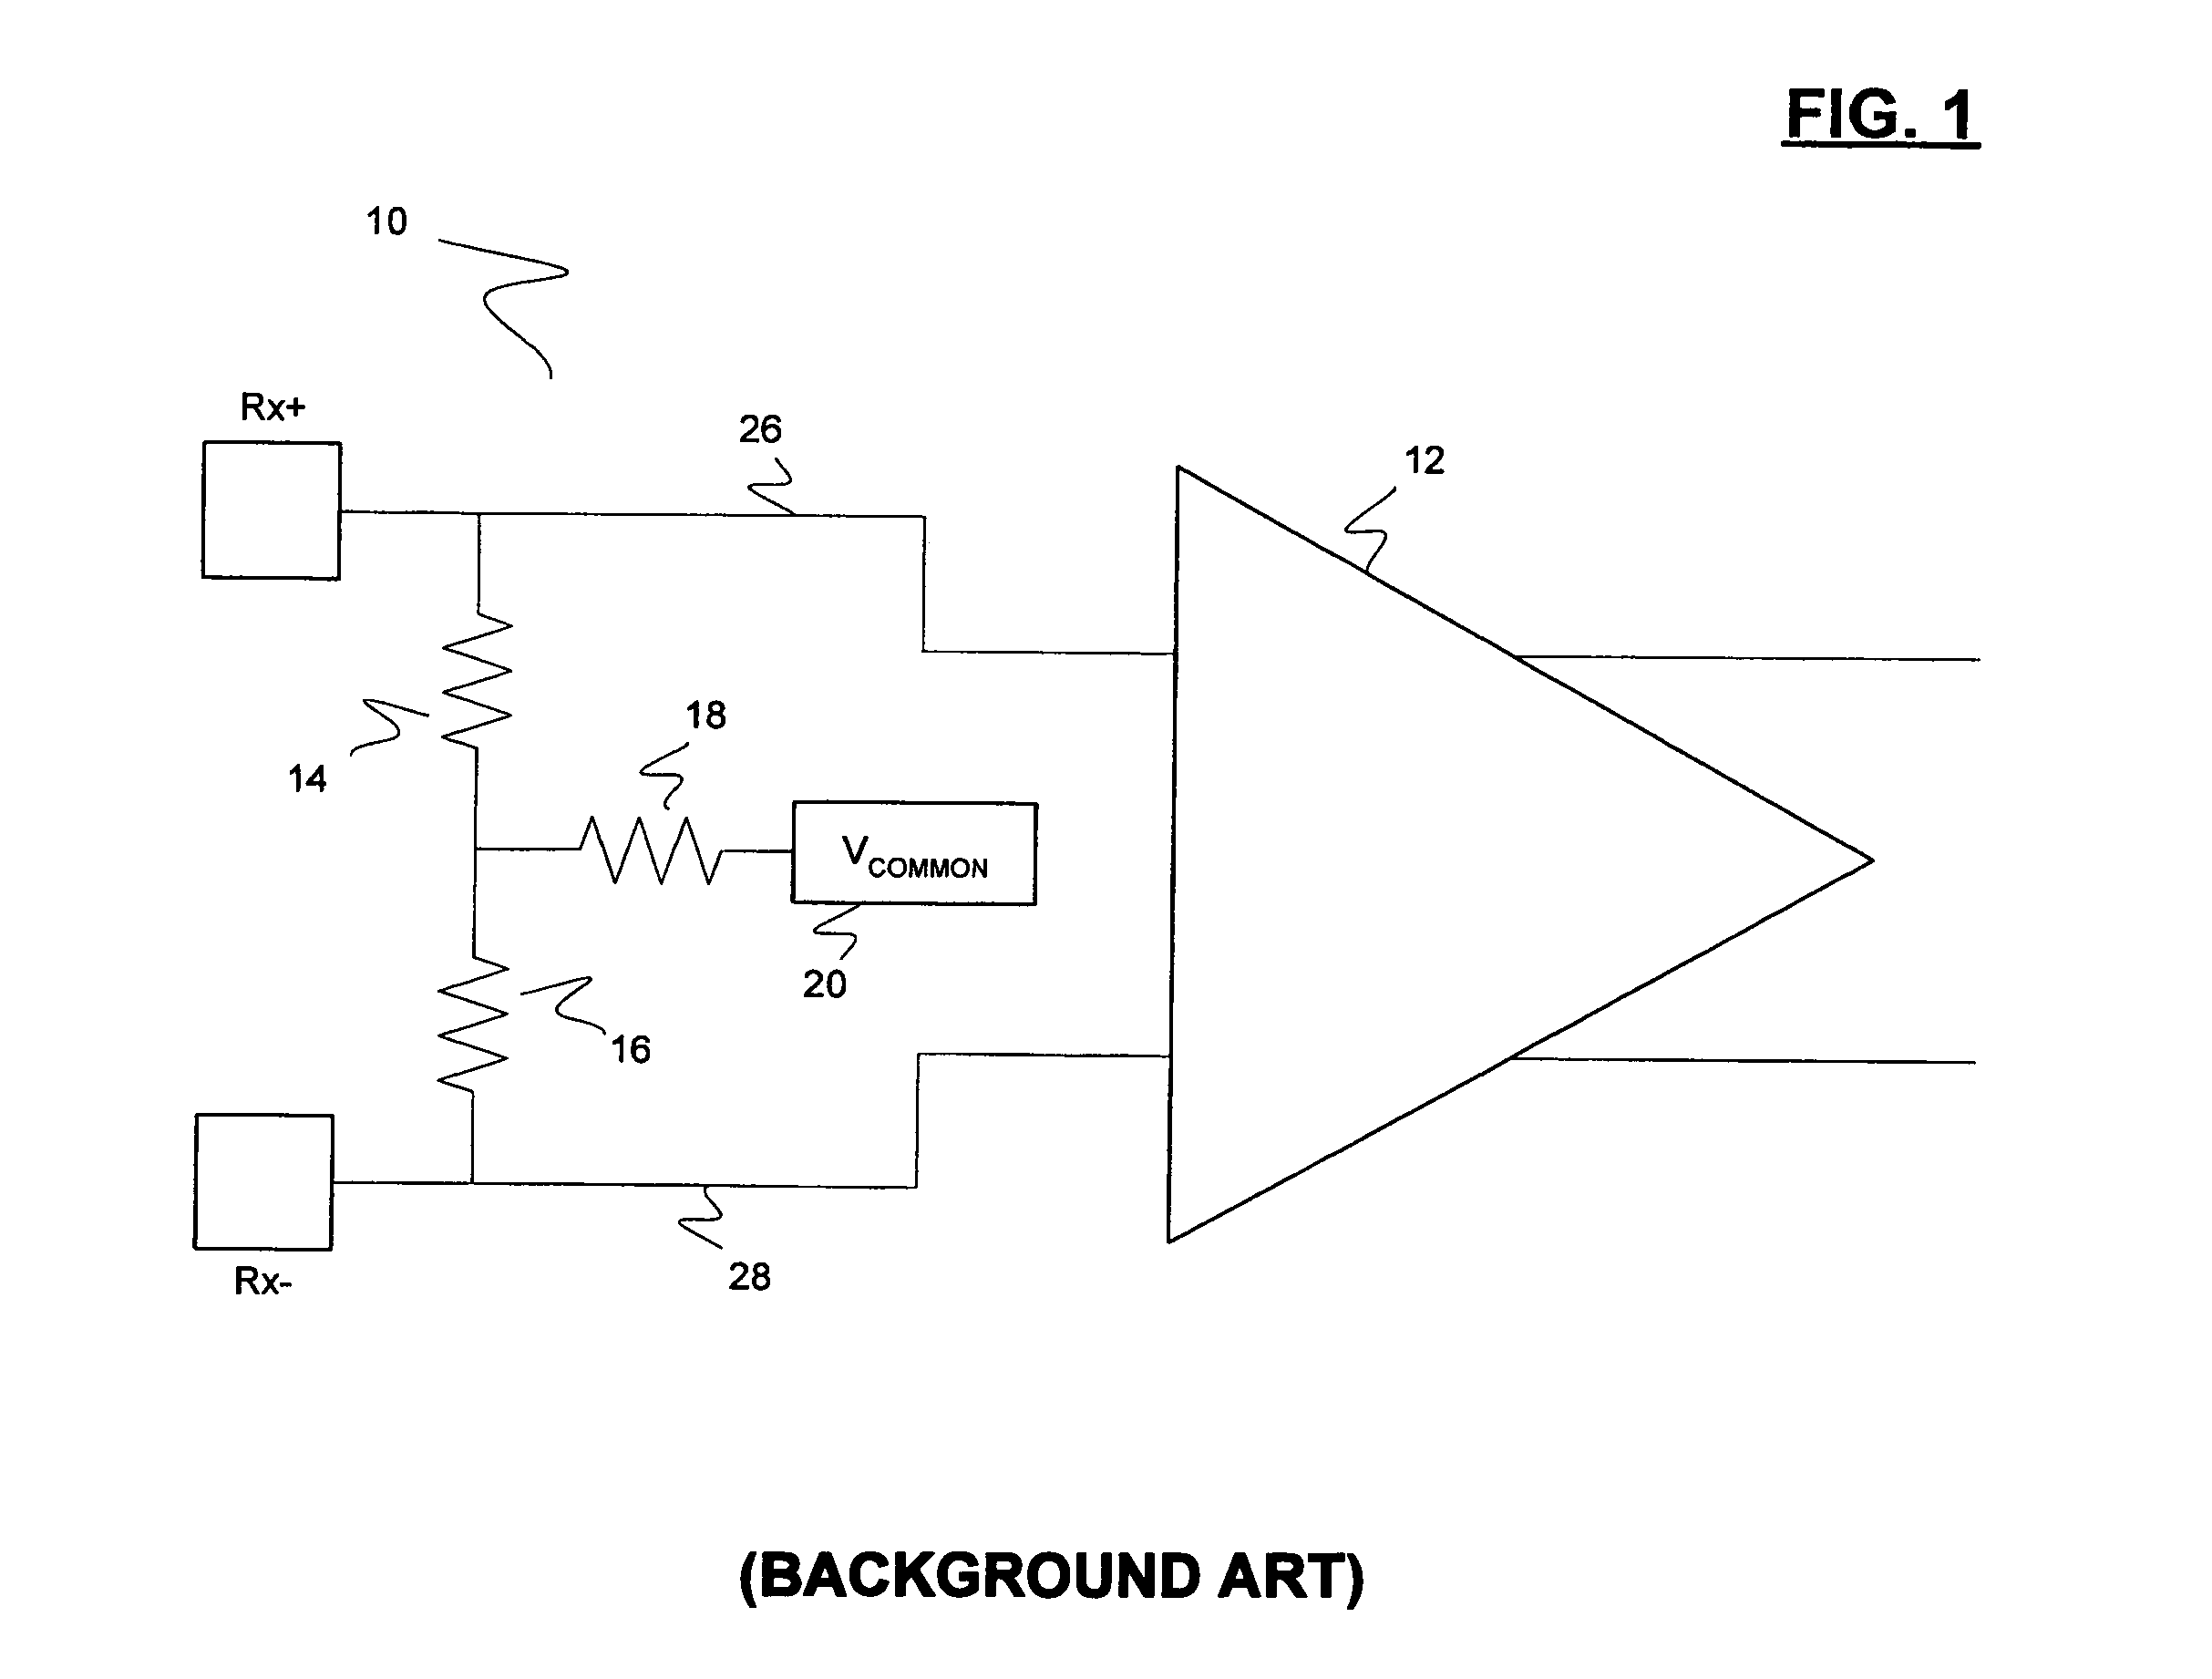 Circuits, architectures, systems and methods for overvoltage protection